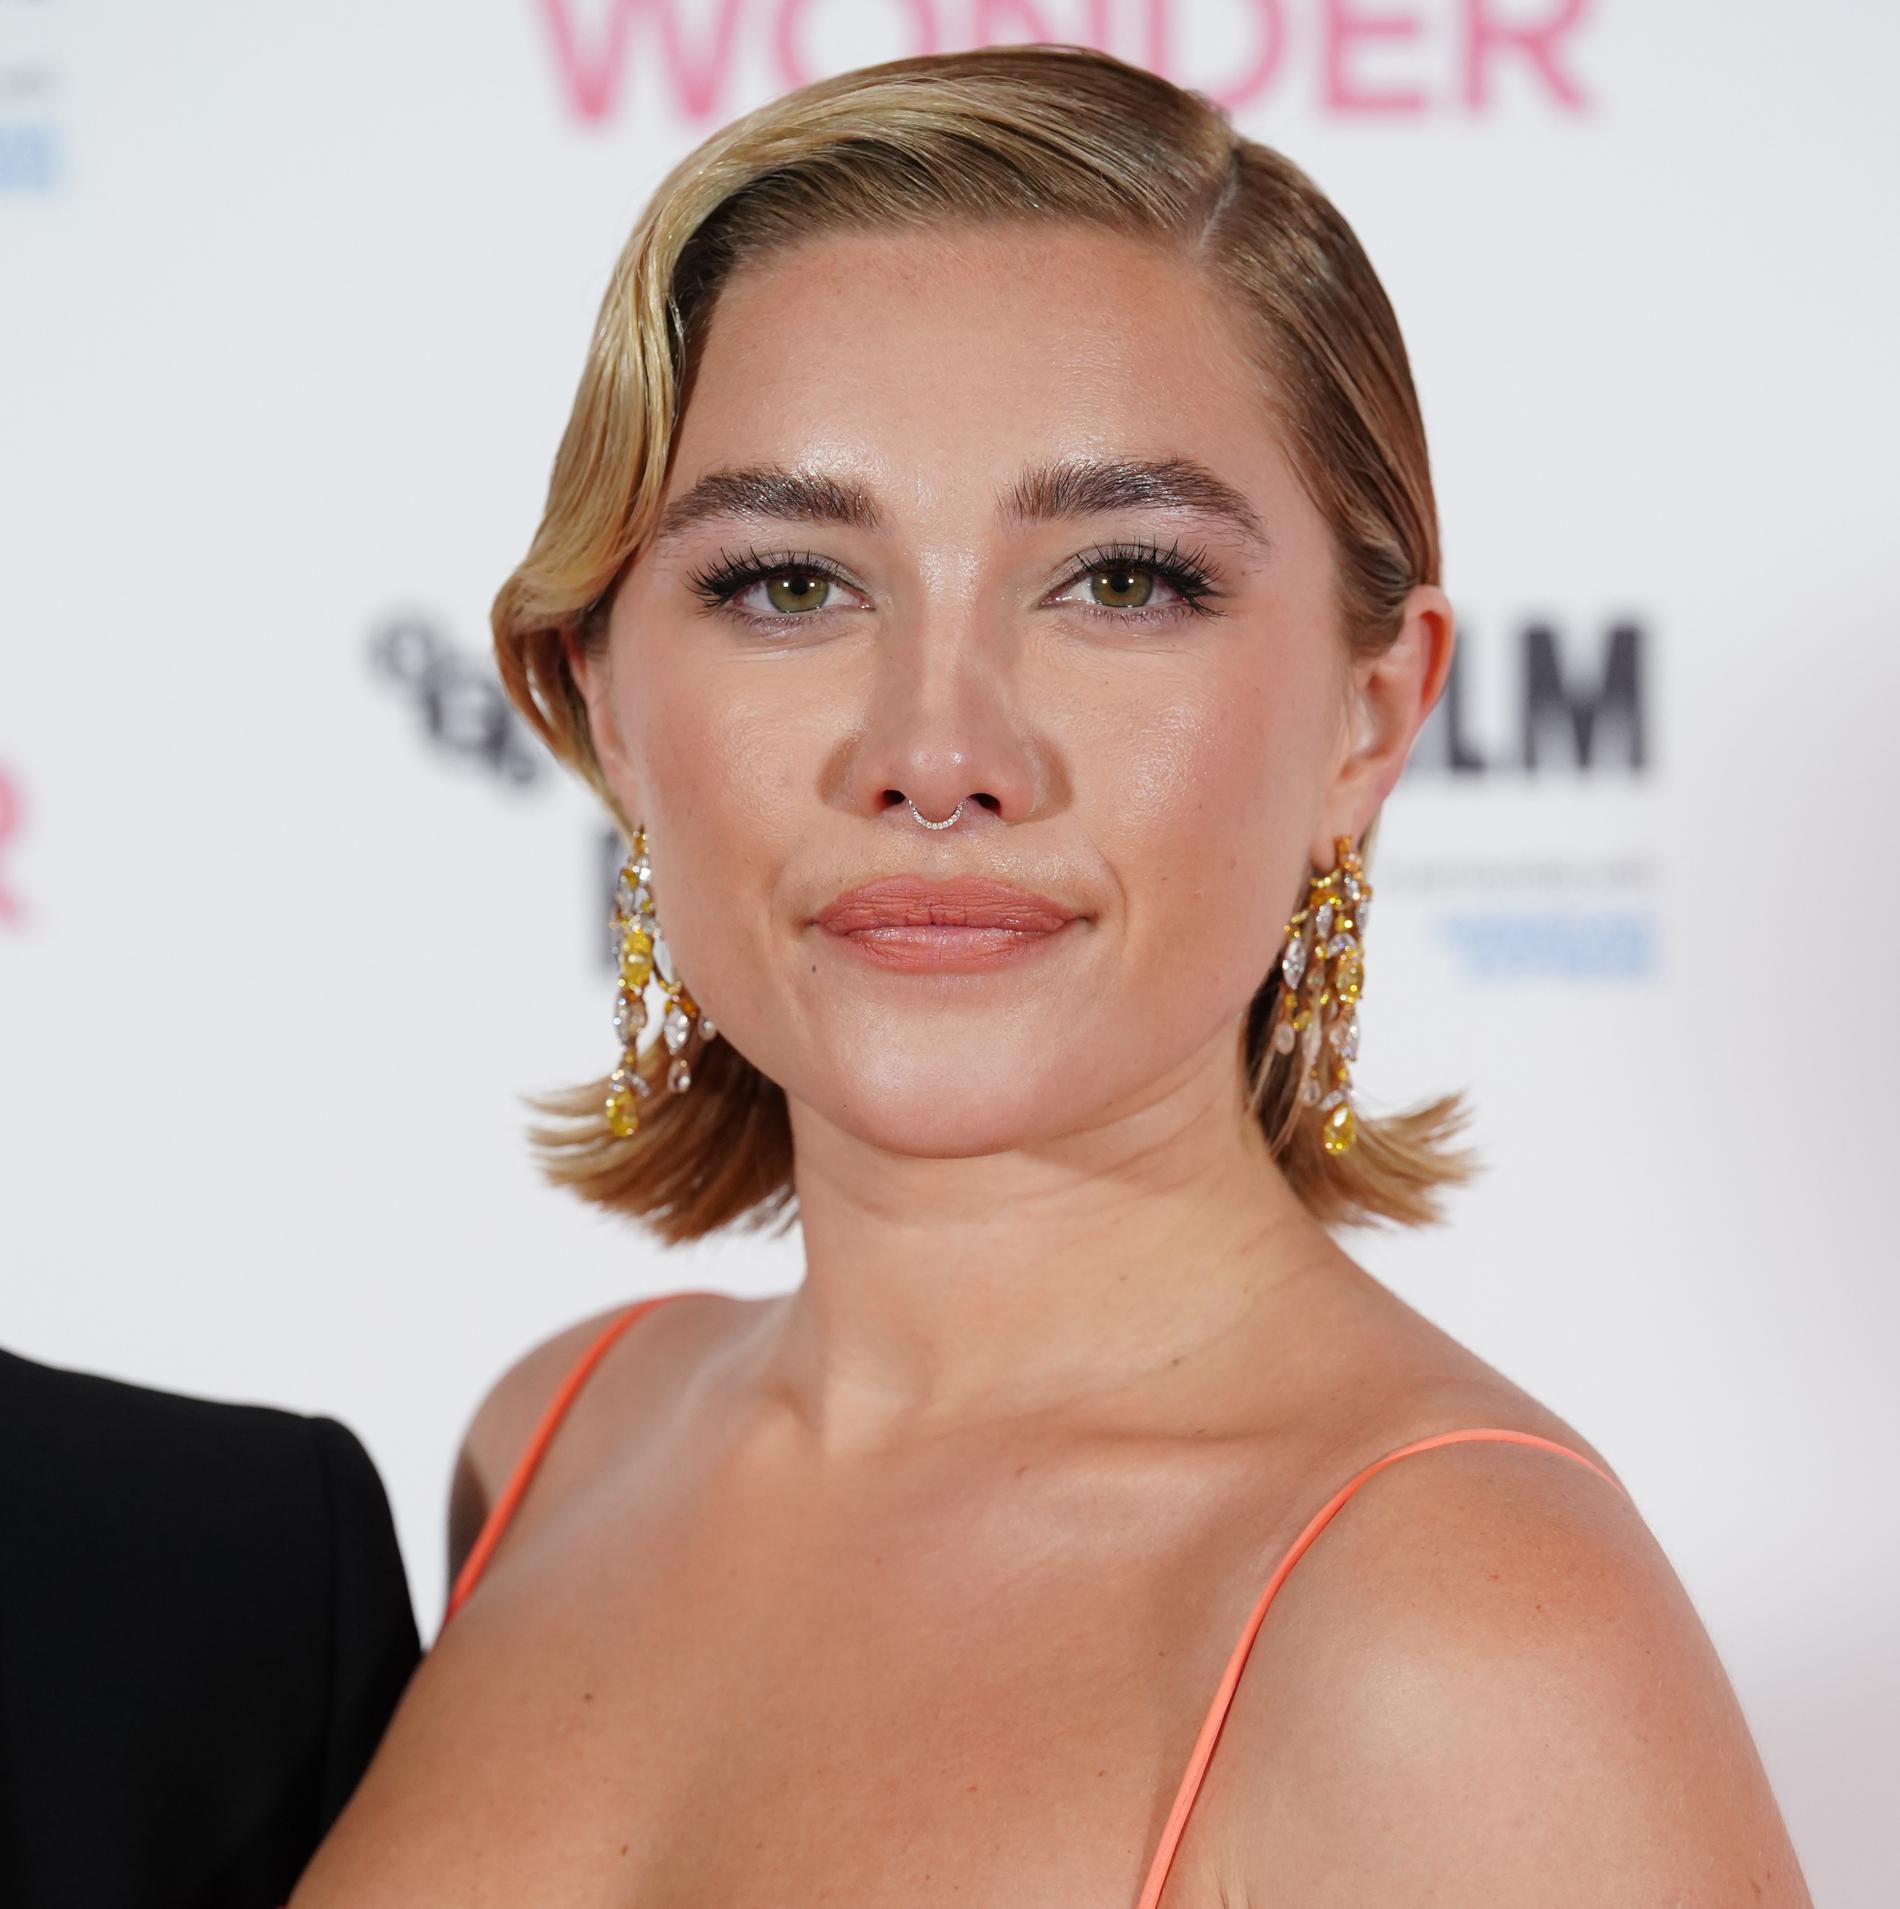 'Little Women' and 'Don't Worry Darling' Star Florence Pugh Claims Film Directors Wanted to Change Her Look - VG